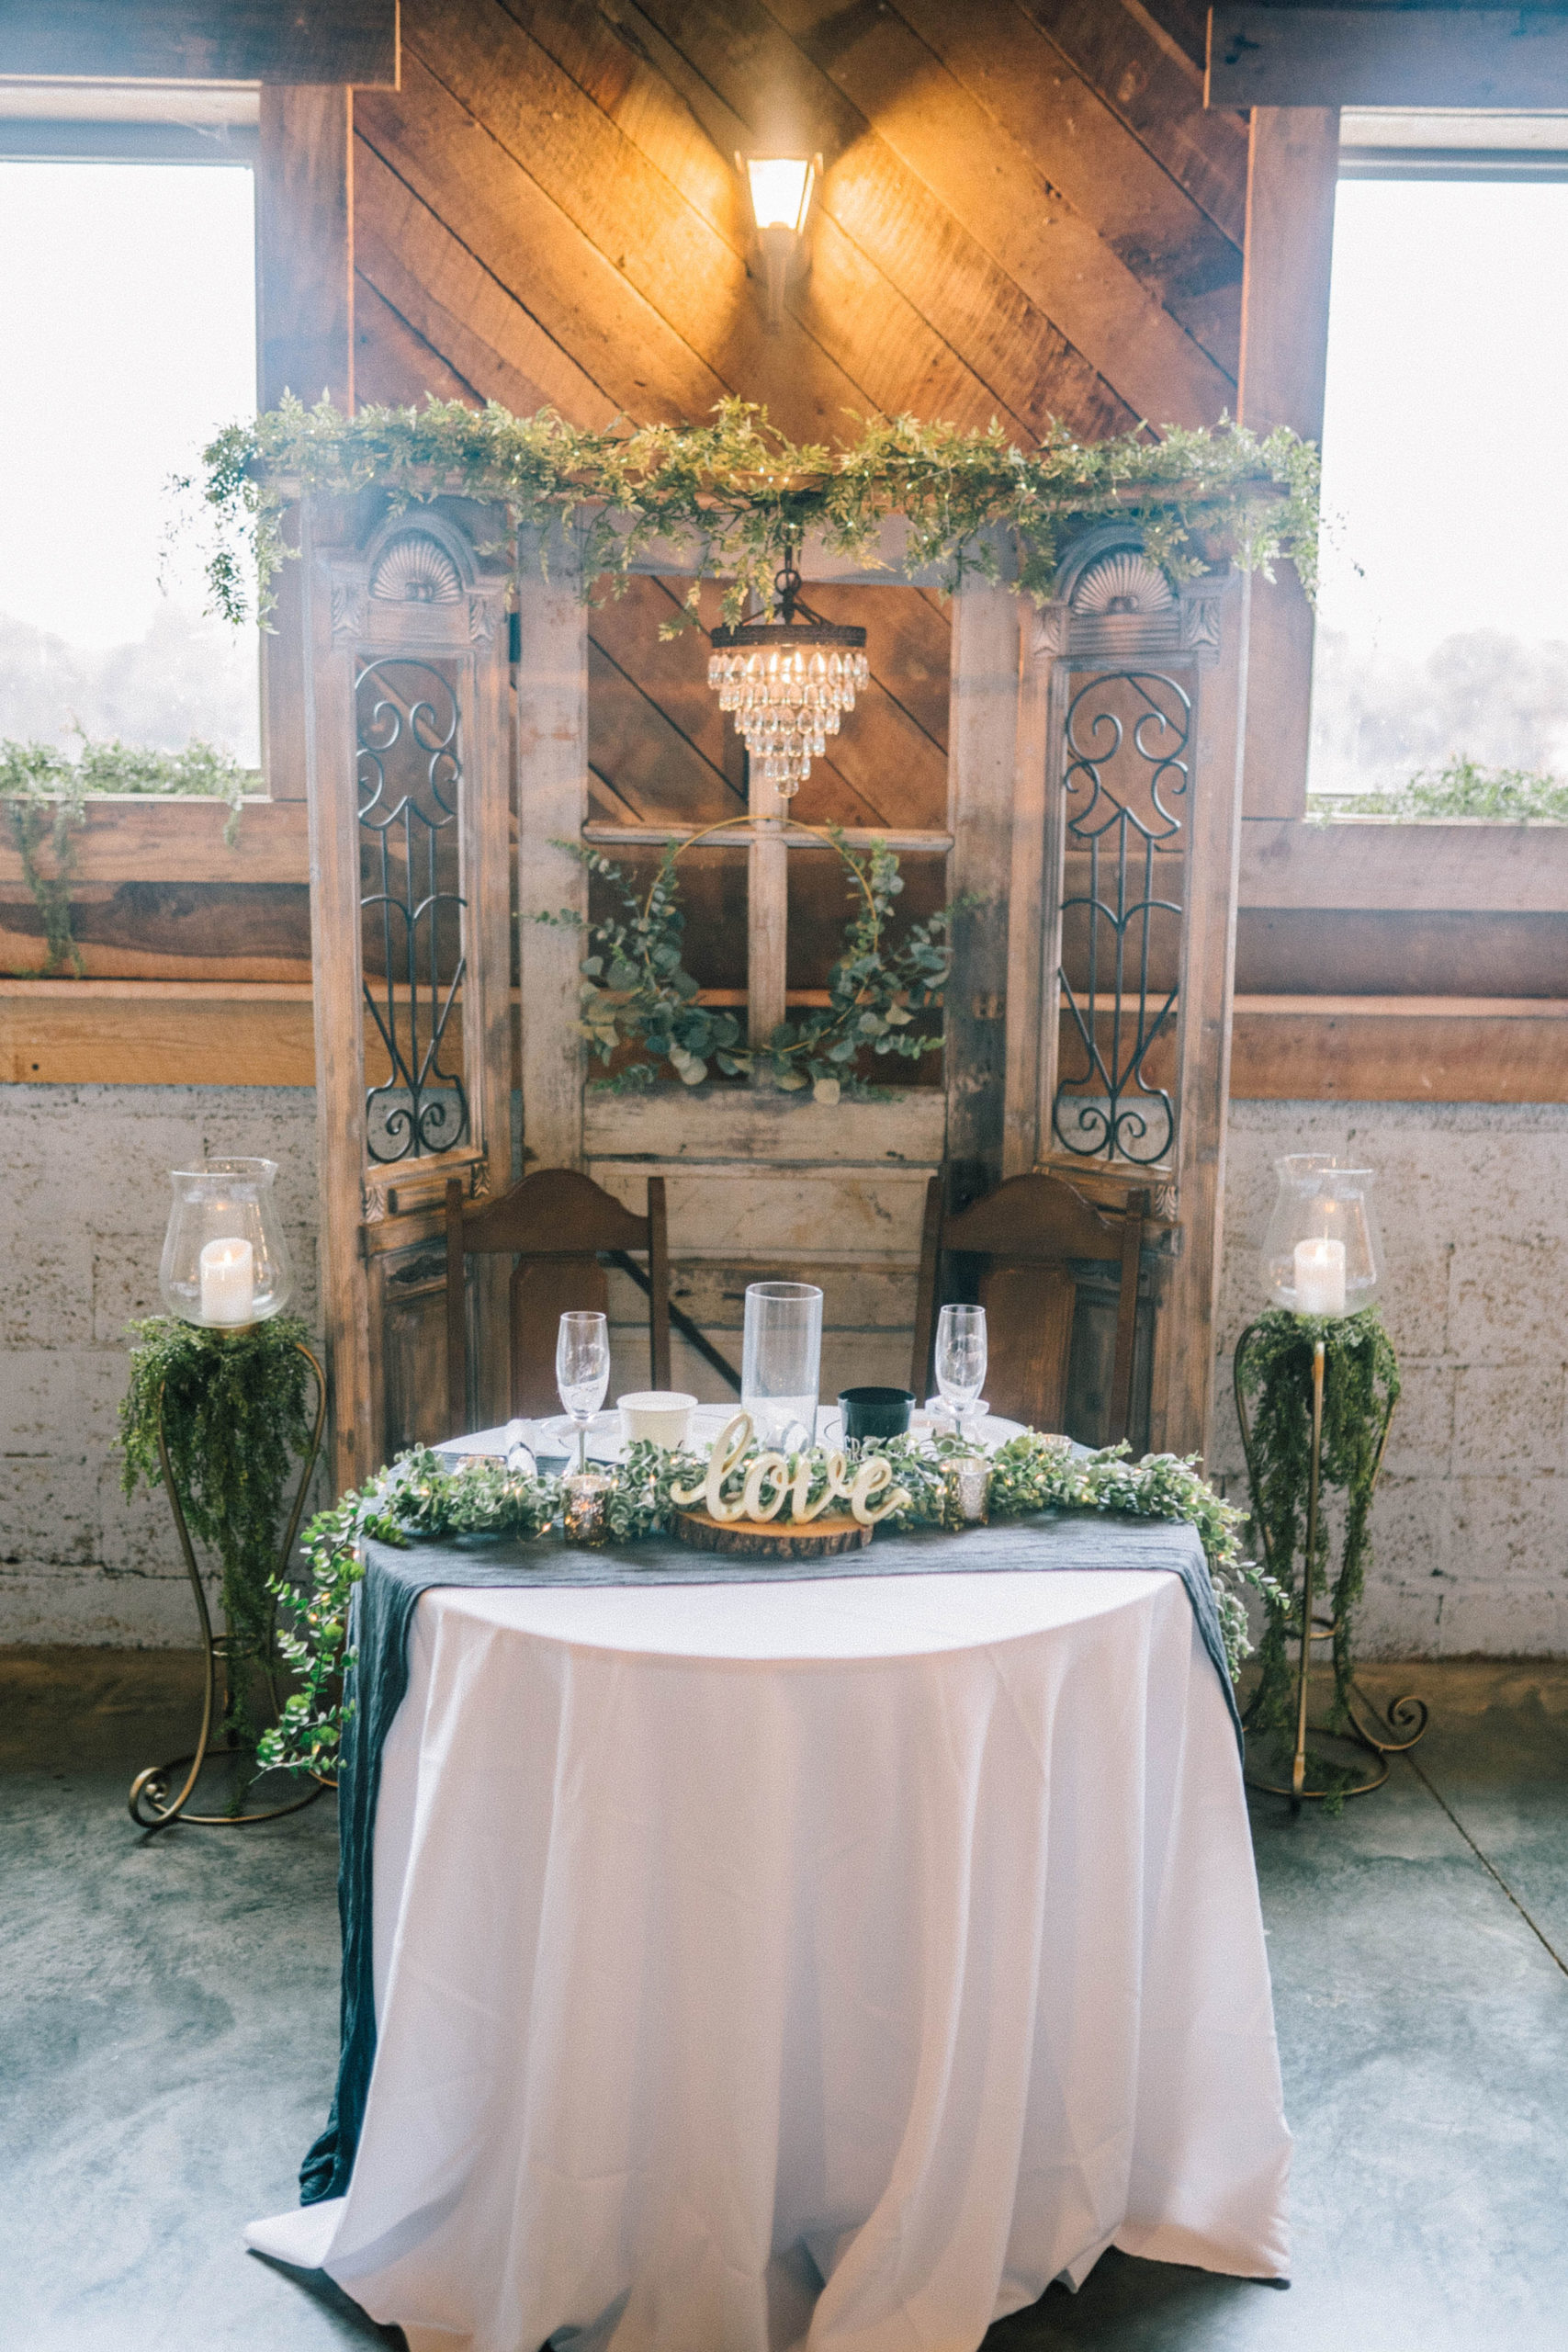 Butler Farms reception space decorated in the most elegant and rustic way for the perfect budget friendly southern wedding.